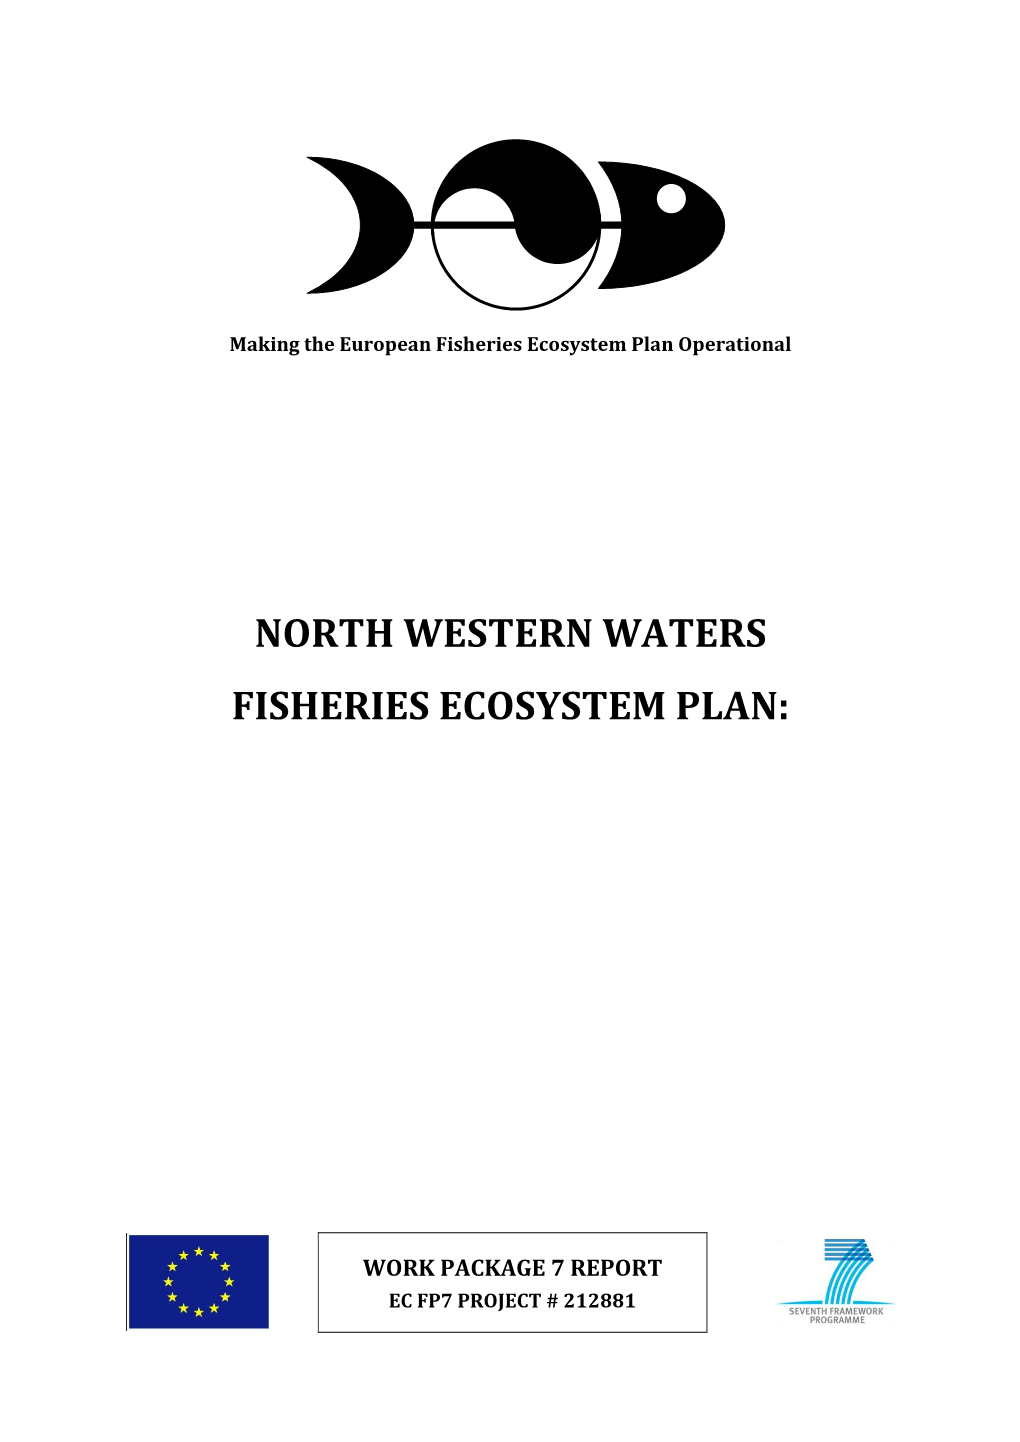 North Western Waters Fisheries Ecosystem Plan